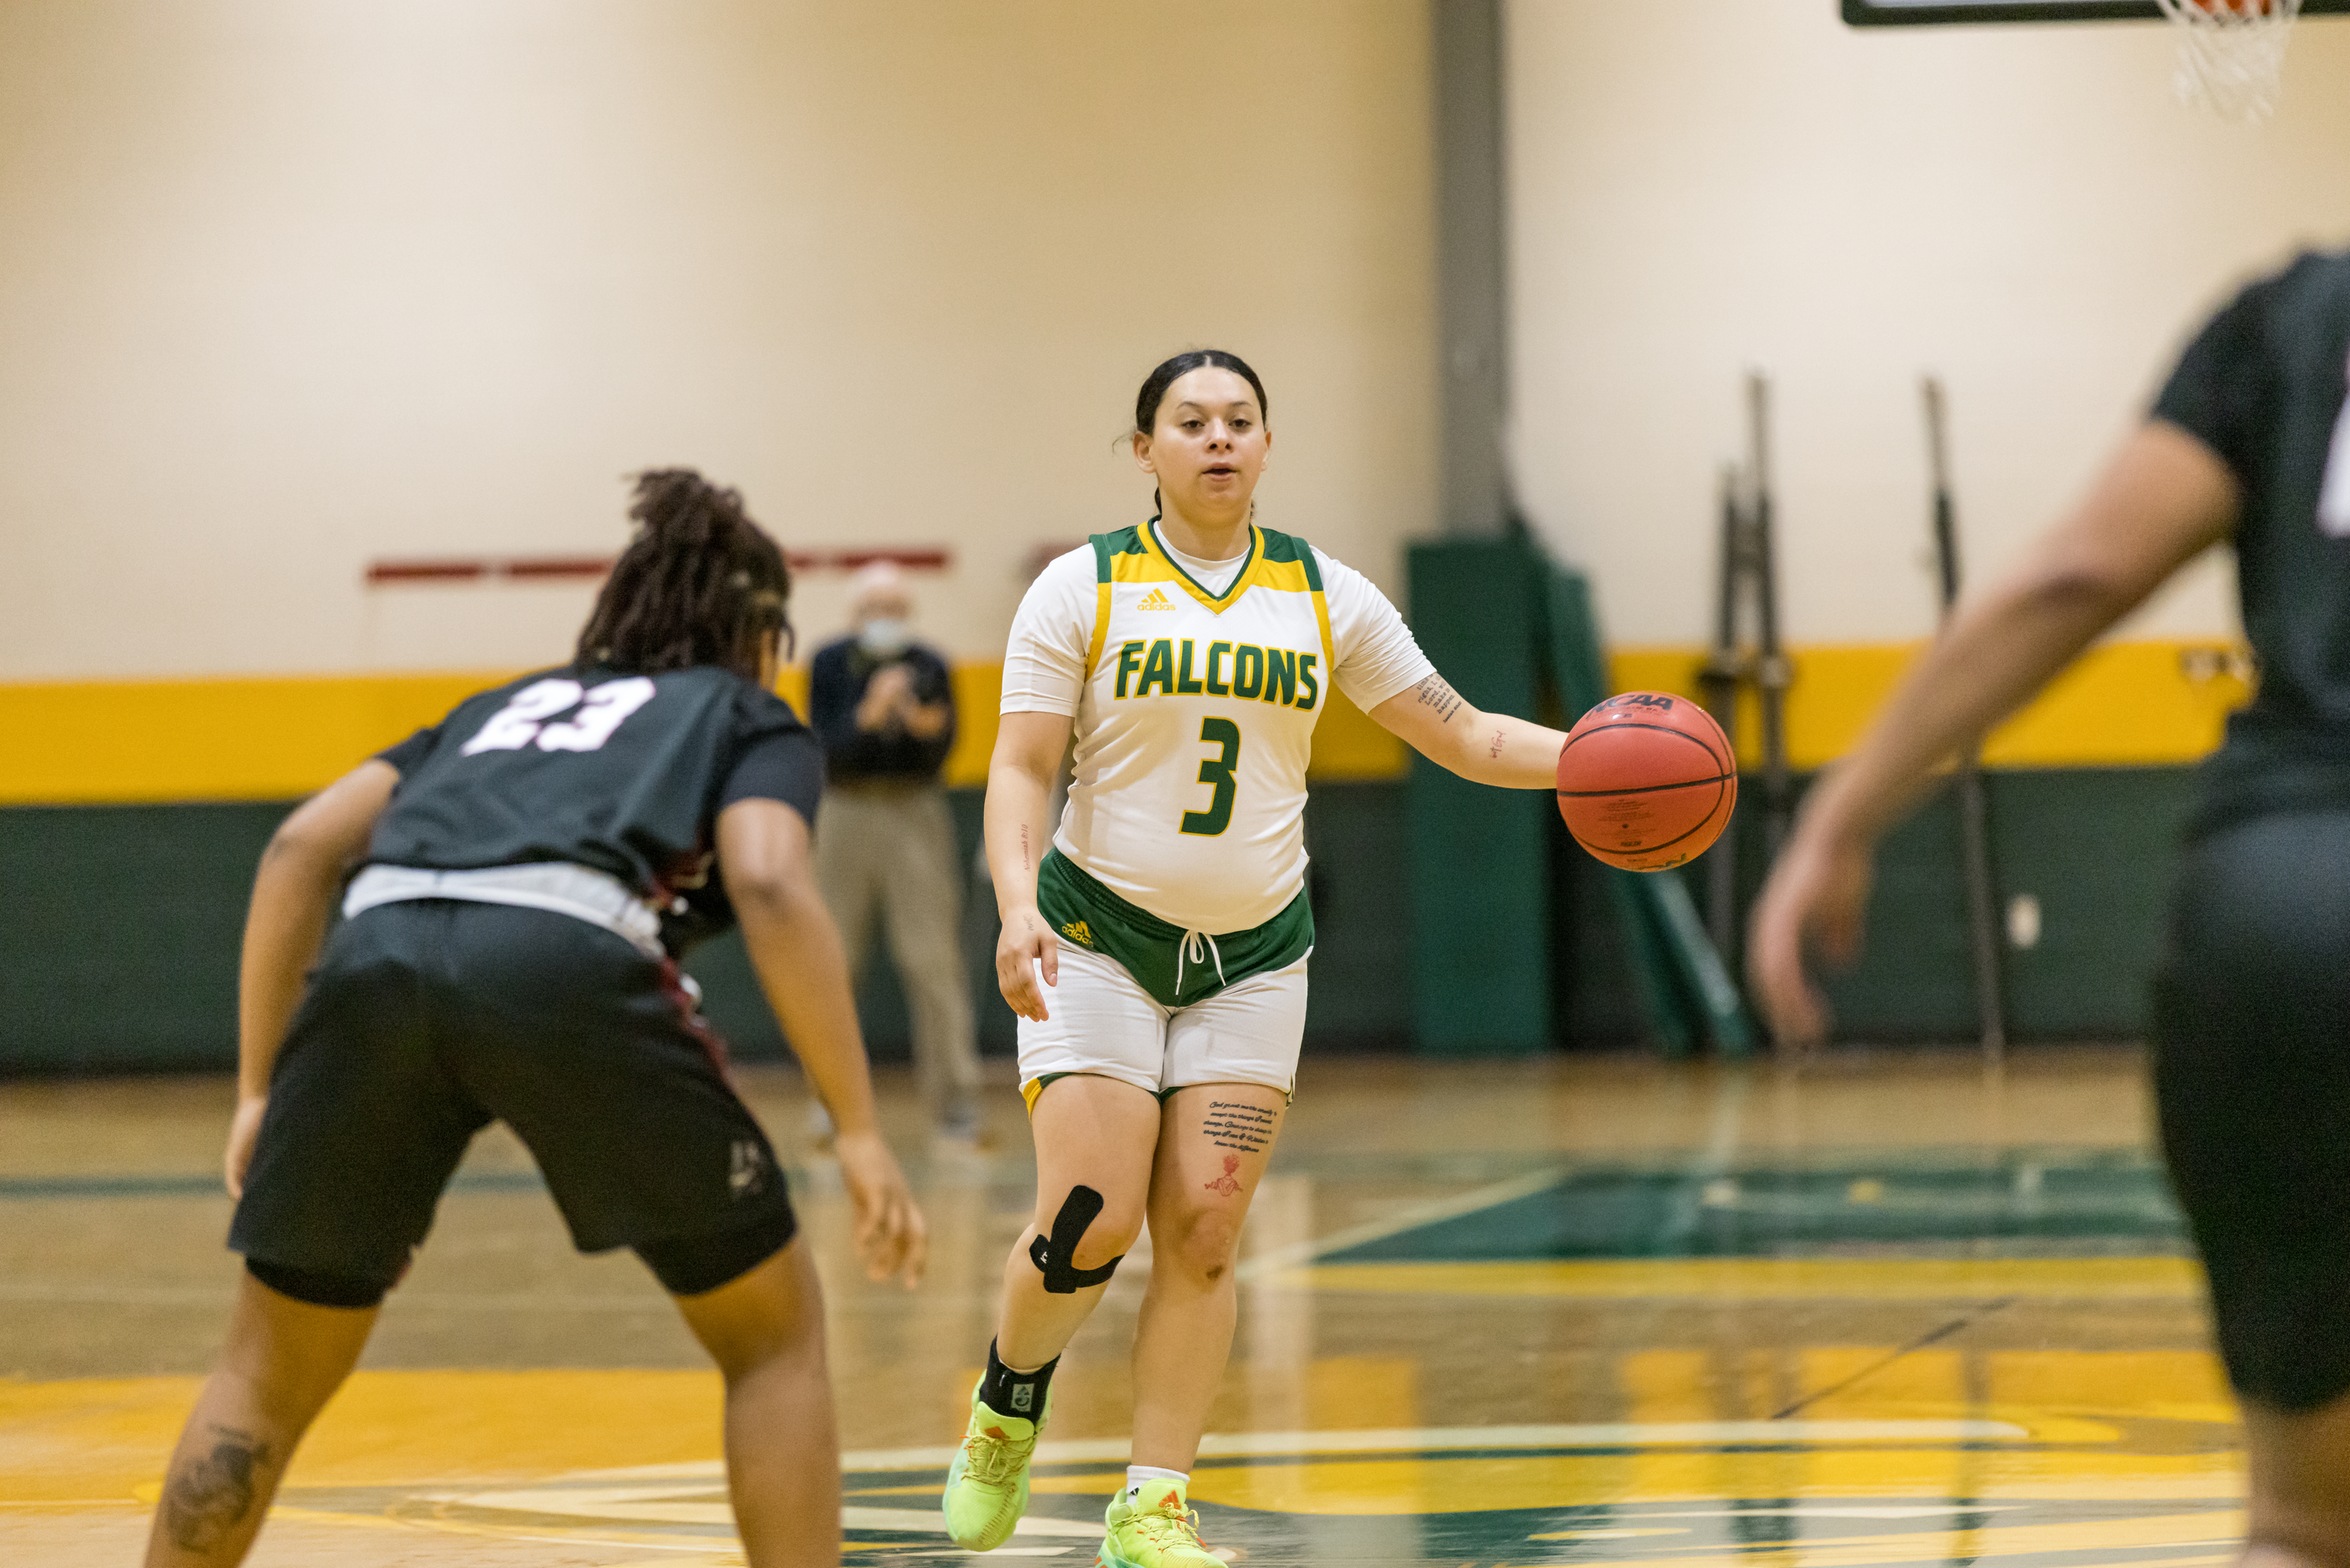 Falcons Fall To Bears In MASCAC Action